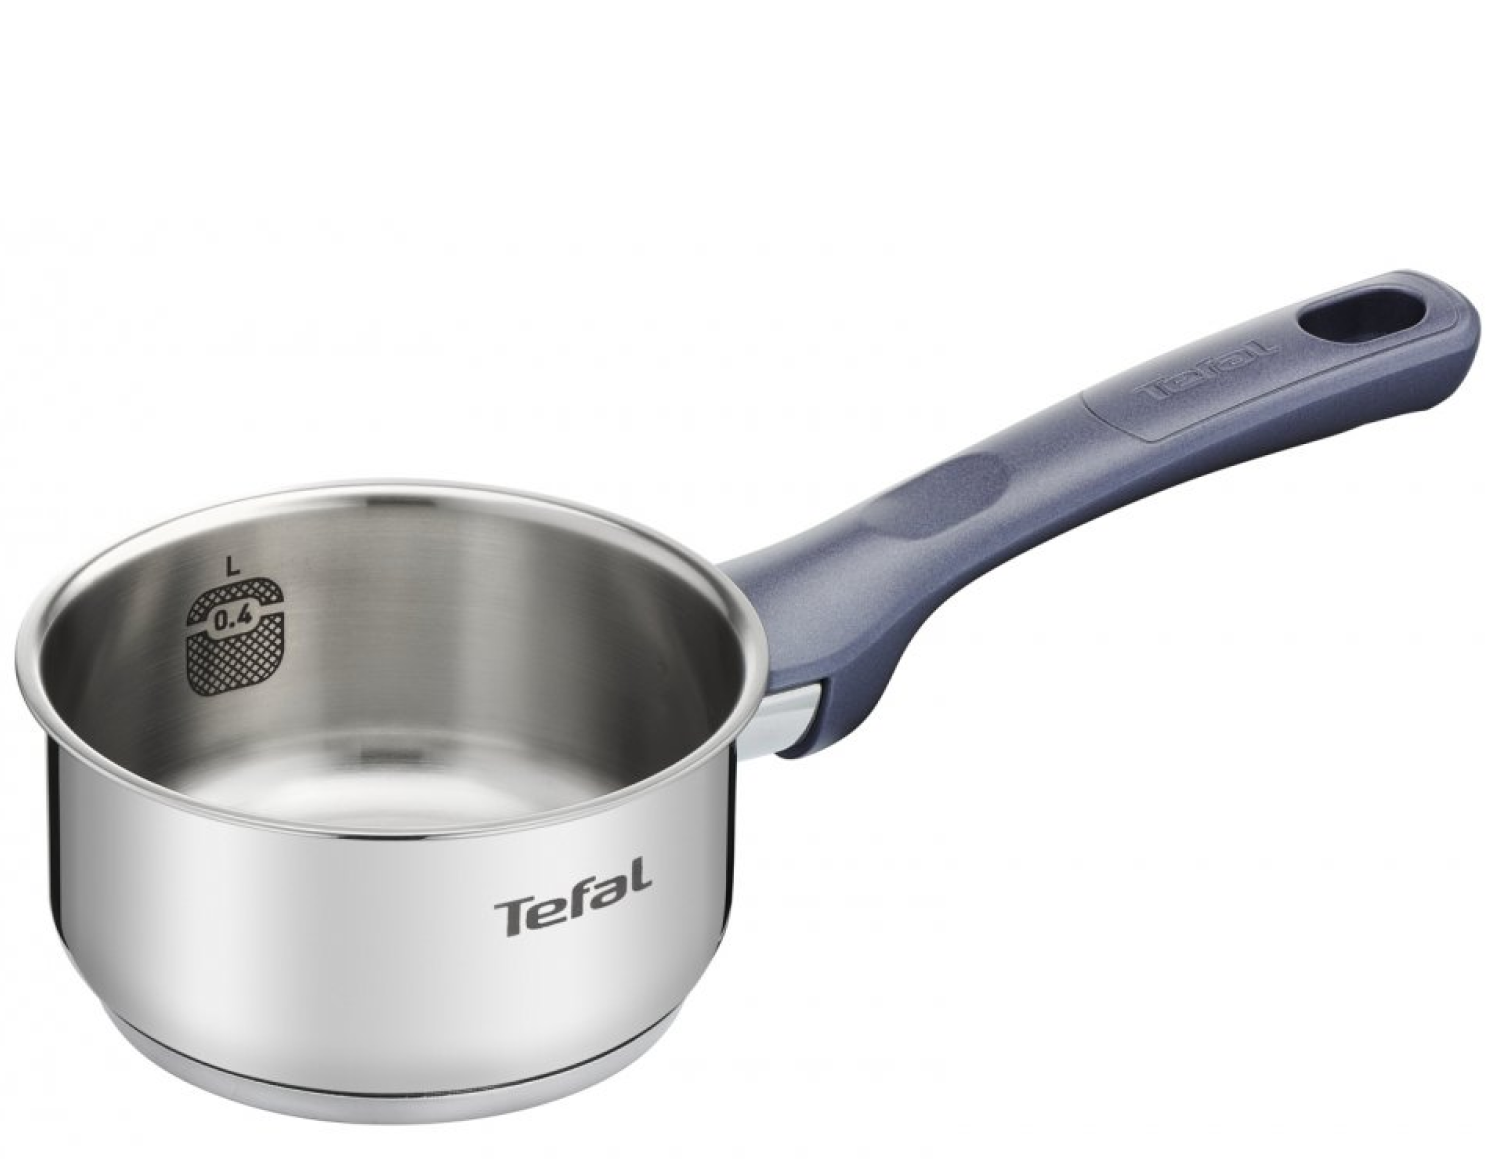 Tefal daily cook. Ковш WR-6020 1,28 Л графит. Ковш winner WR-6020 графит. Ковш Tefal g6052374. Tefal Daily Cook g7300555.